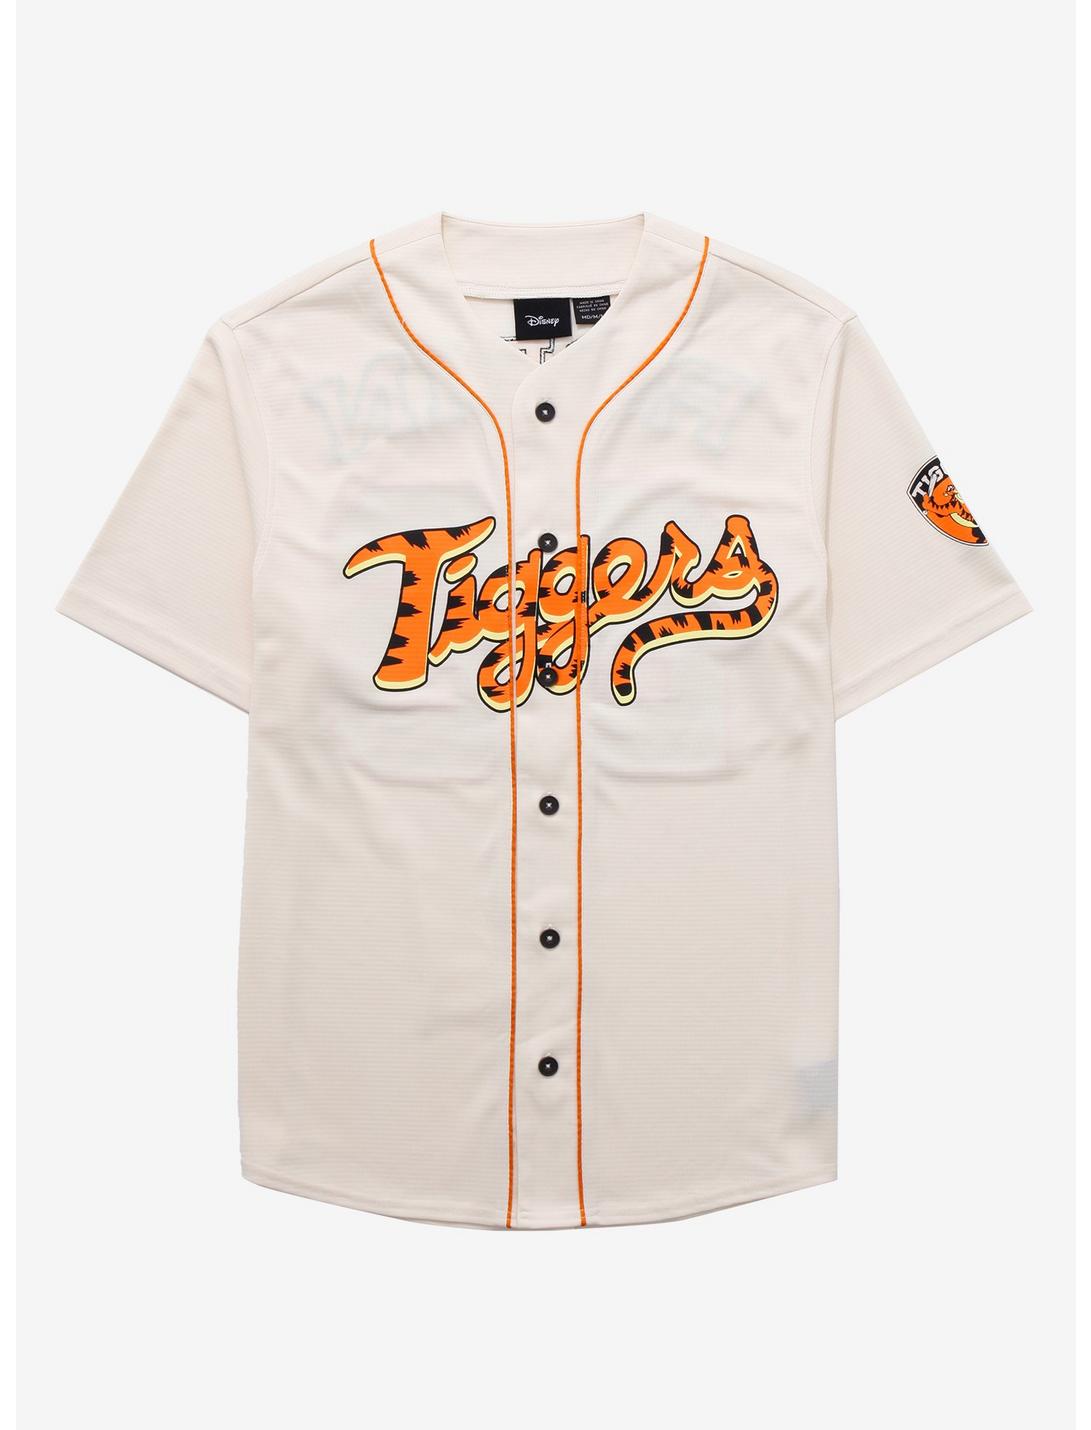 Disney Winnie the Pooh Tiggers Baseball Jersey - BoxLunch Exclusive, , hi-res